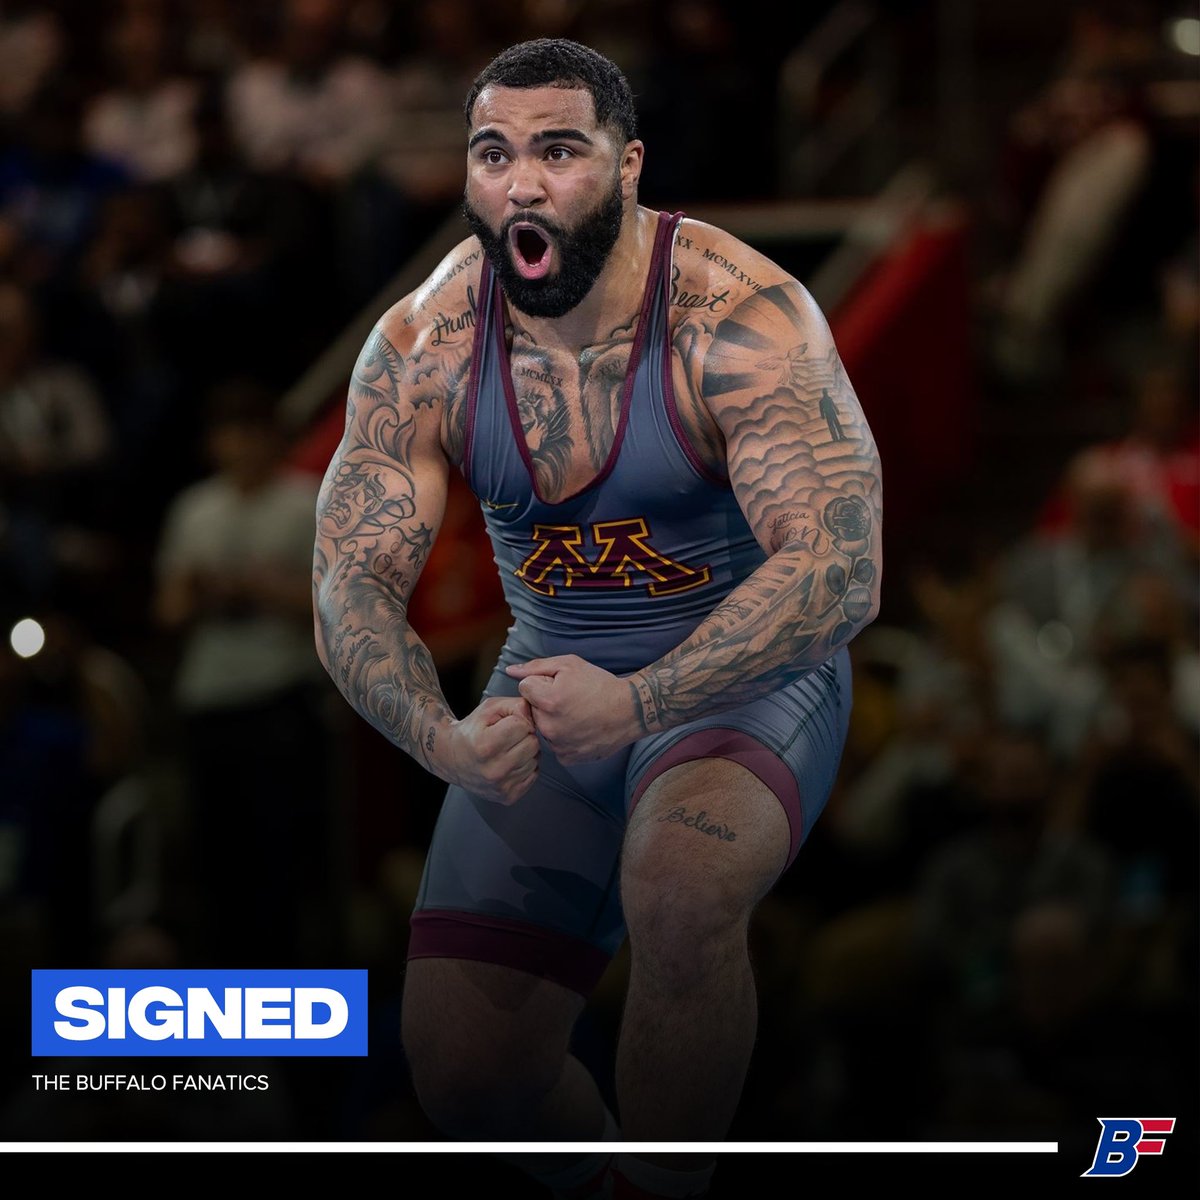 Olympic gold medalist wrestler, Gable Steveson is signing with the #Bills. He’s expected to play on the defensive line. Welcome to Buffalo @GableSteveson 🦬

#BillsMafia